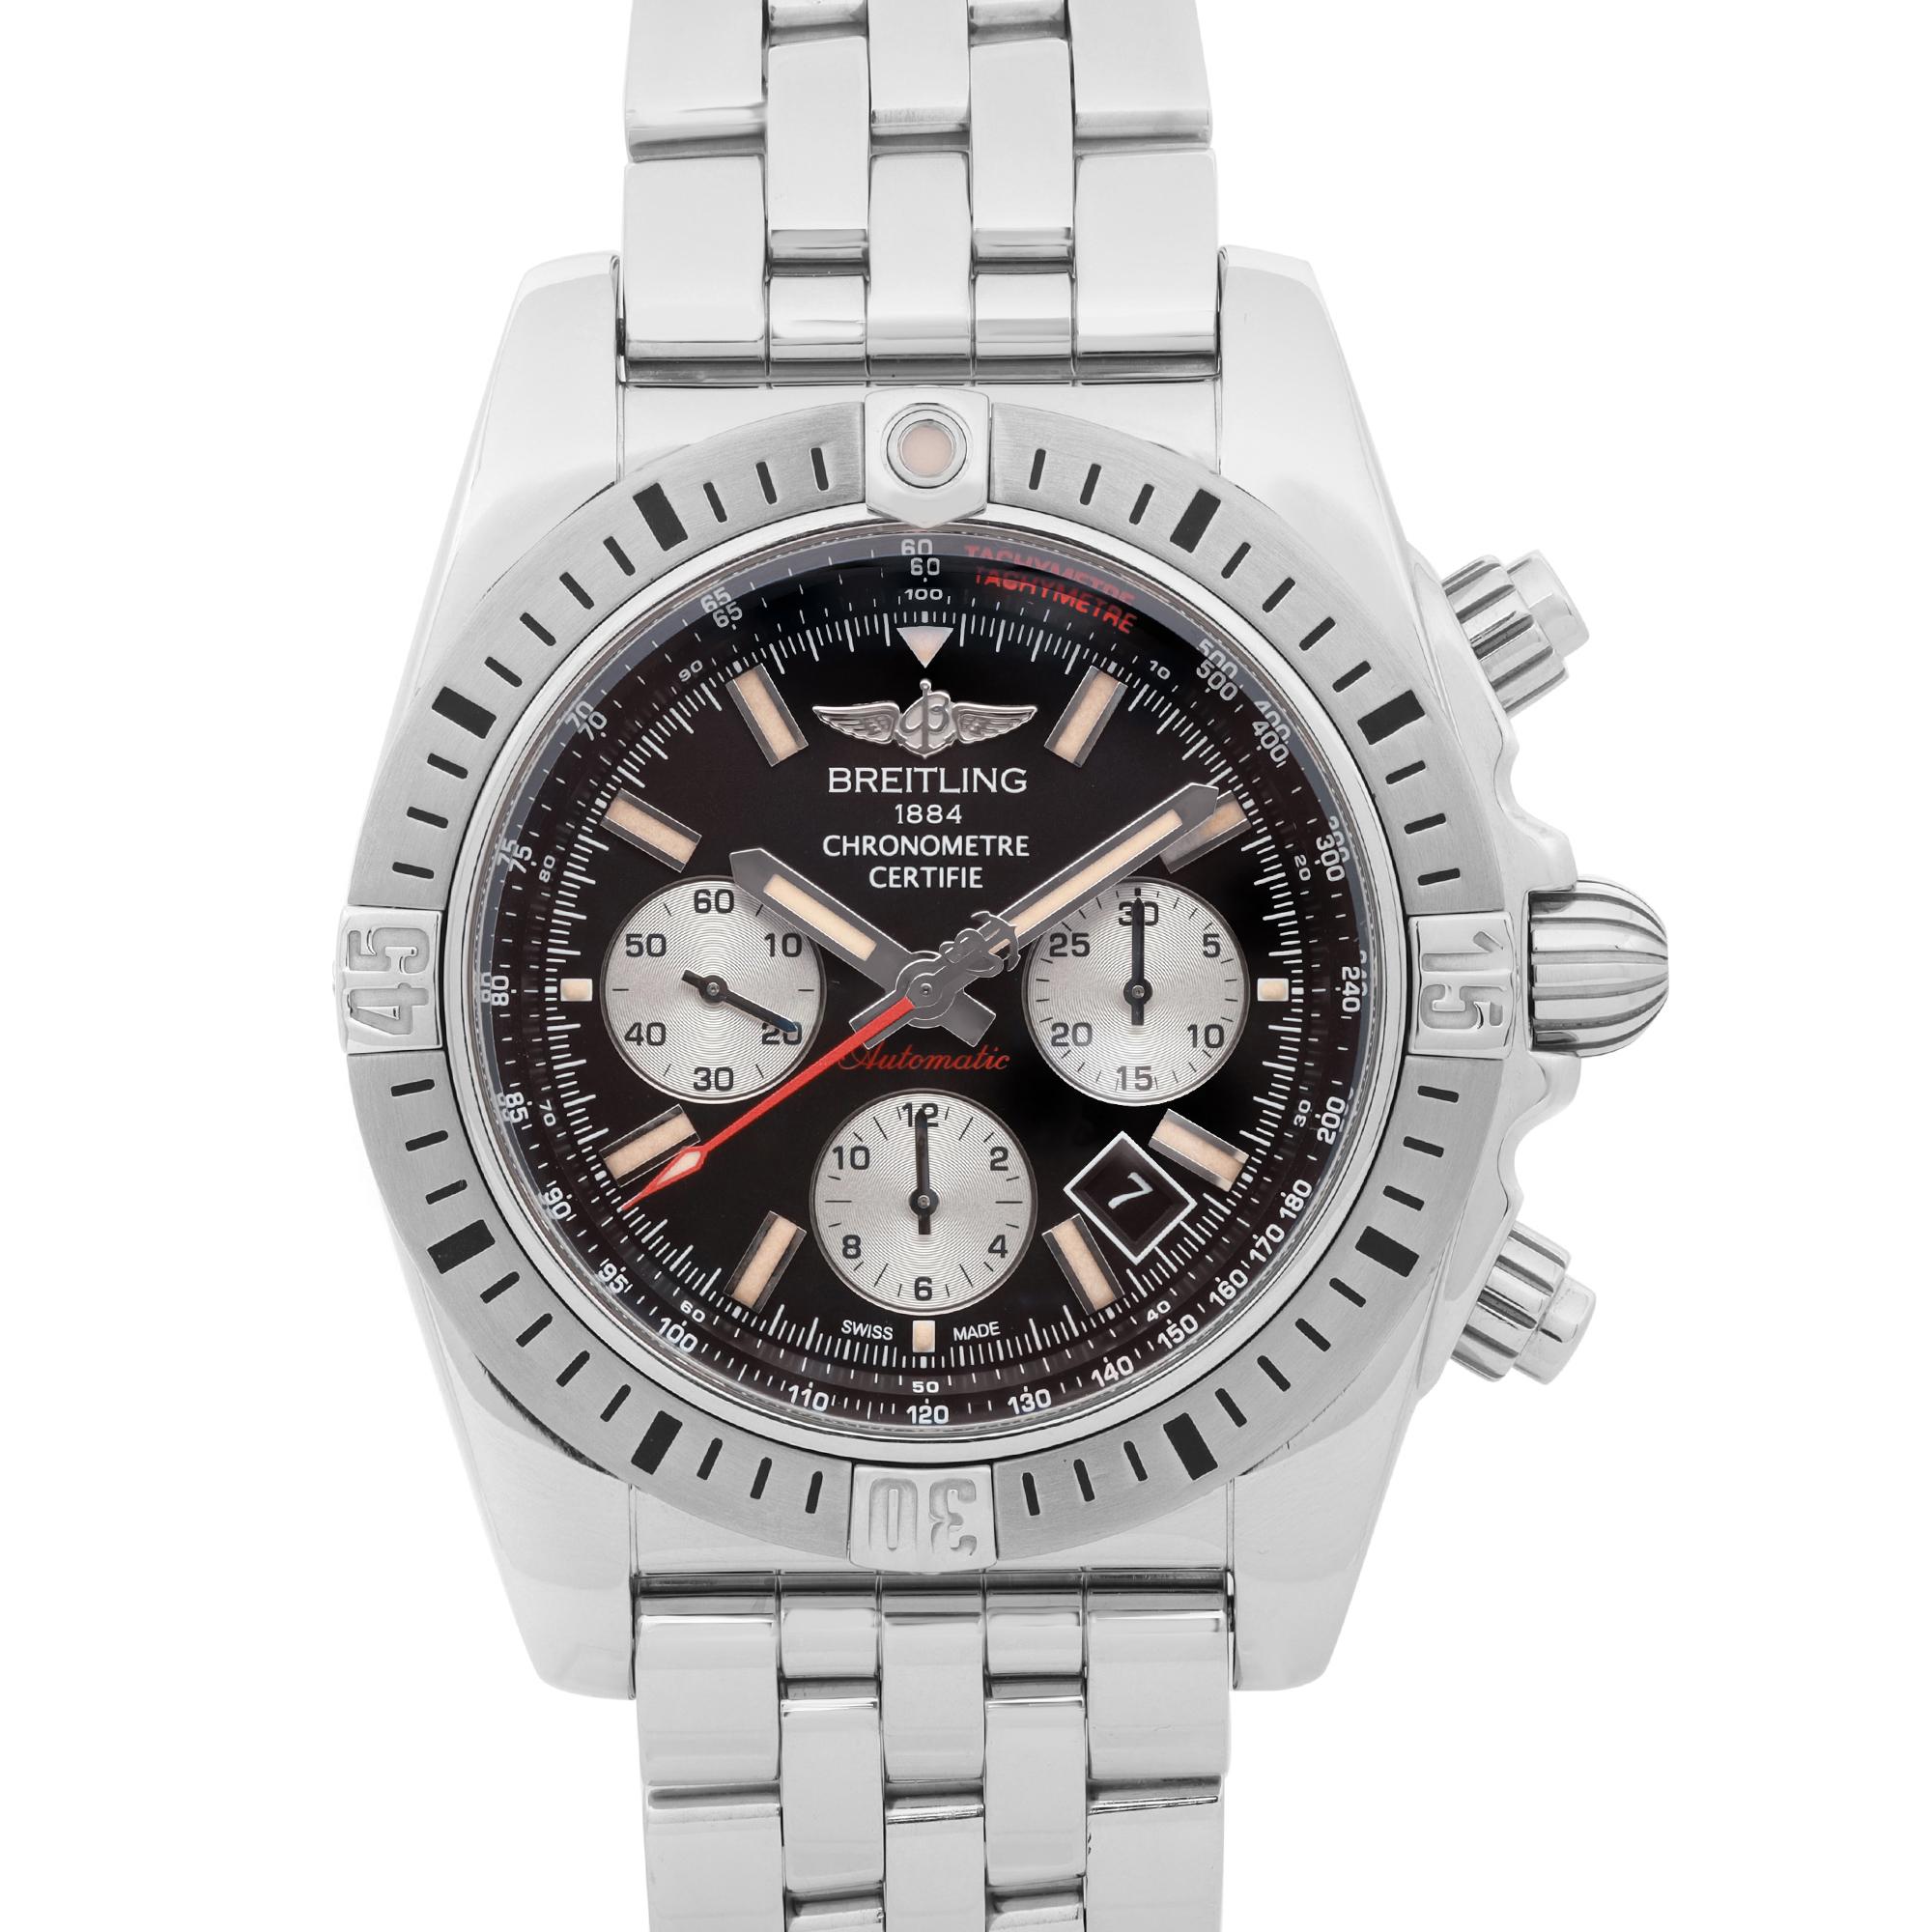 This Breitling watch is pre-owned but in good condition. Full links. The timepiece has minor marks on the bezel, and tiny dents on the case back. No original box and papers are included. Comes with a gift box and the seller's warranty card. 

